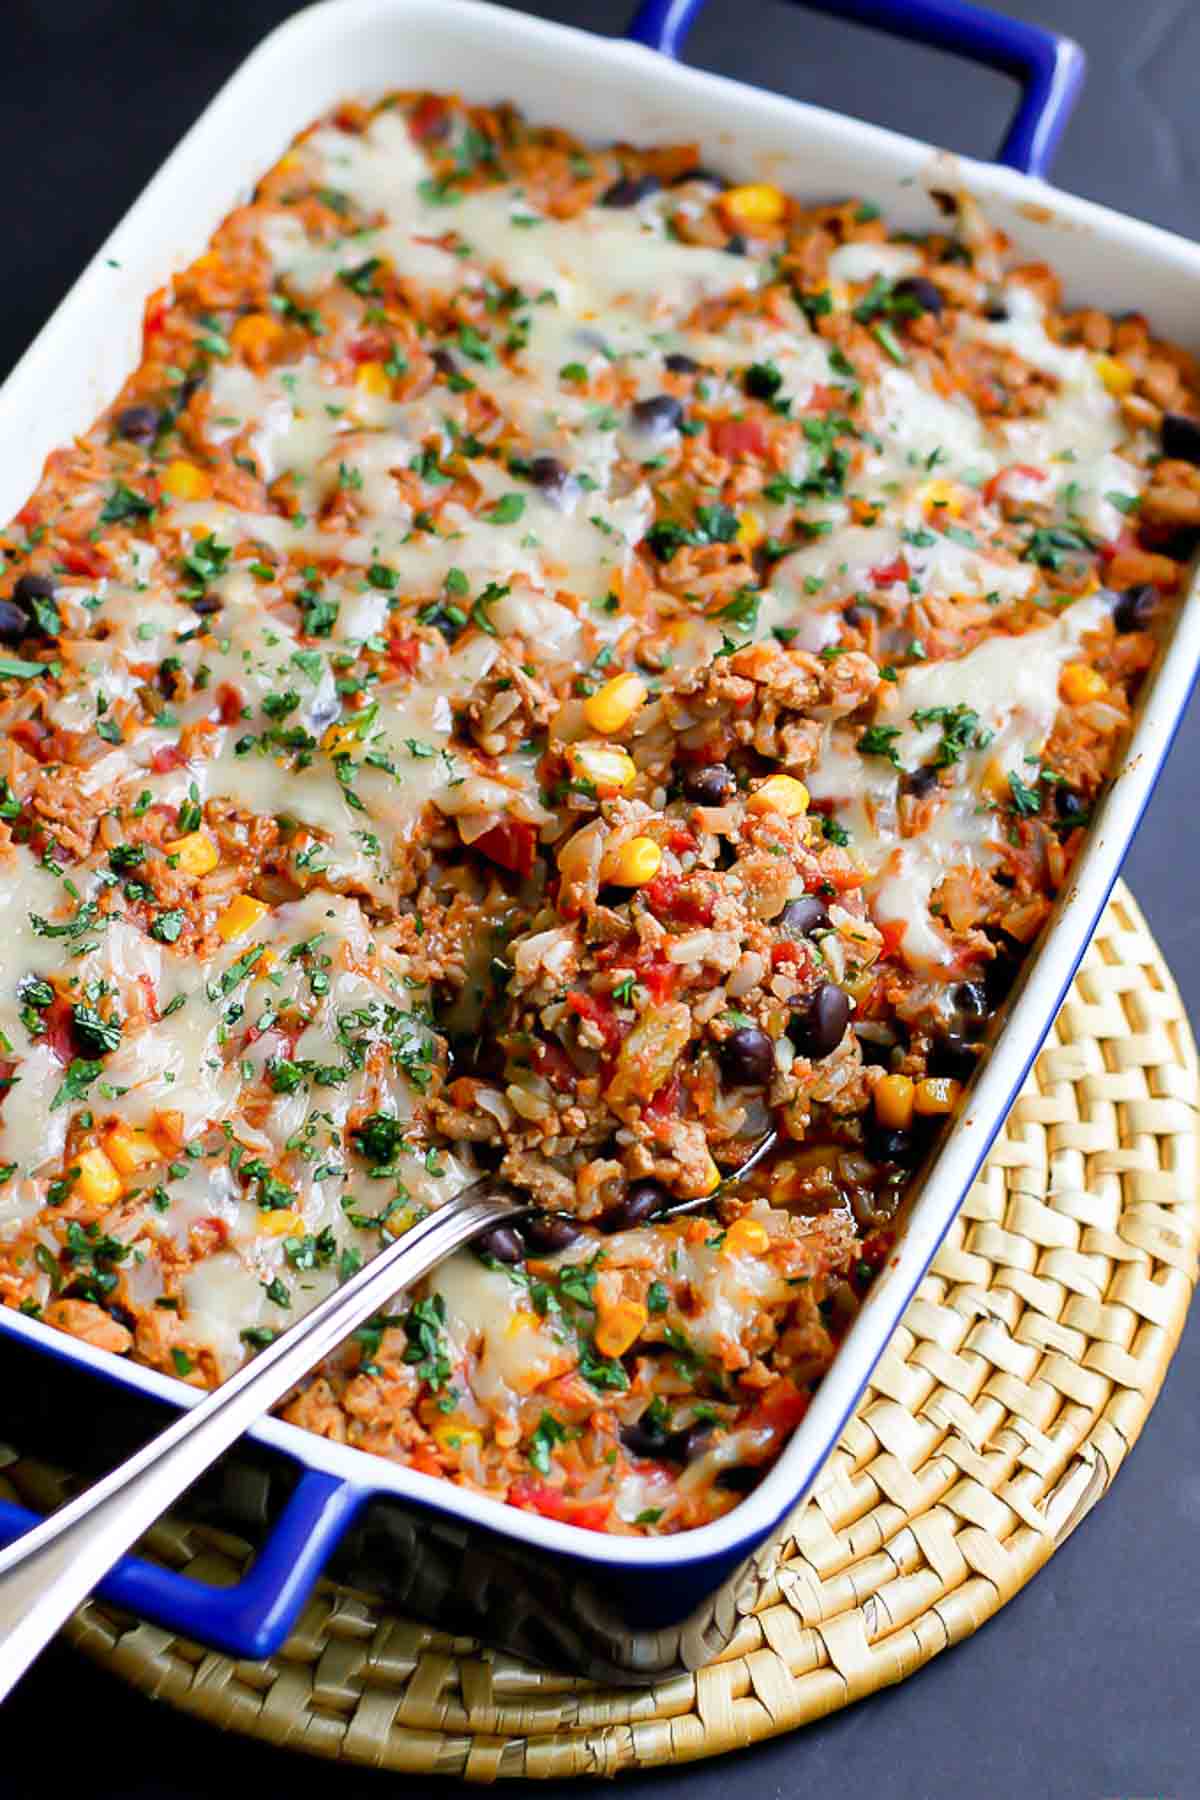 Turkey Casserole Recipe: Healthy Weeknight Dinner with Vegetables and Spices